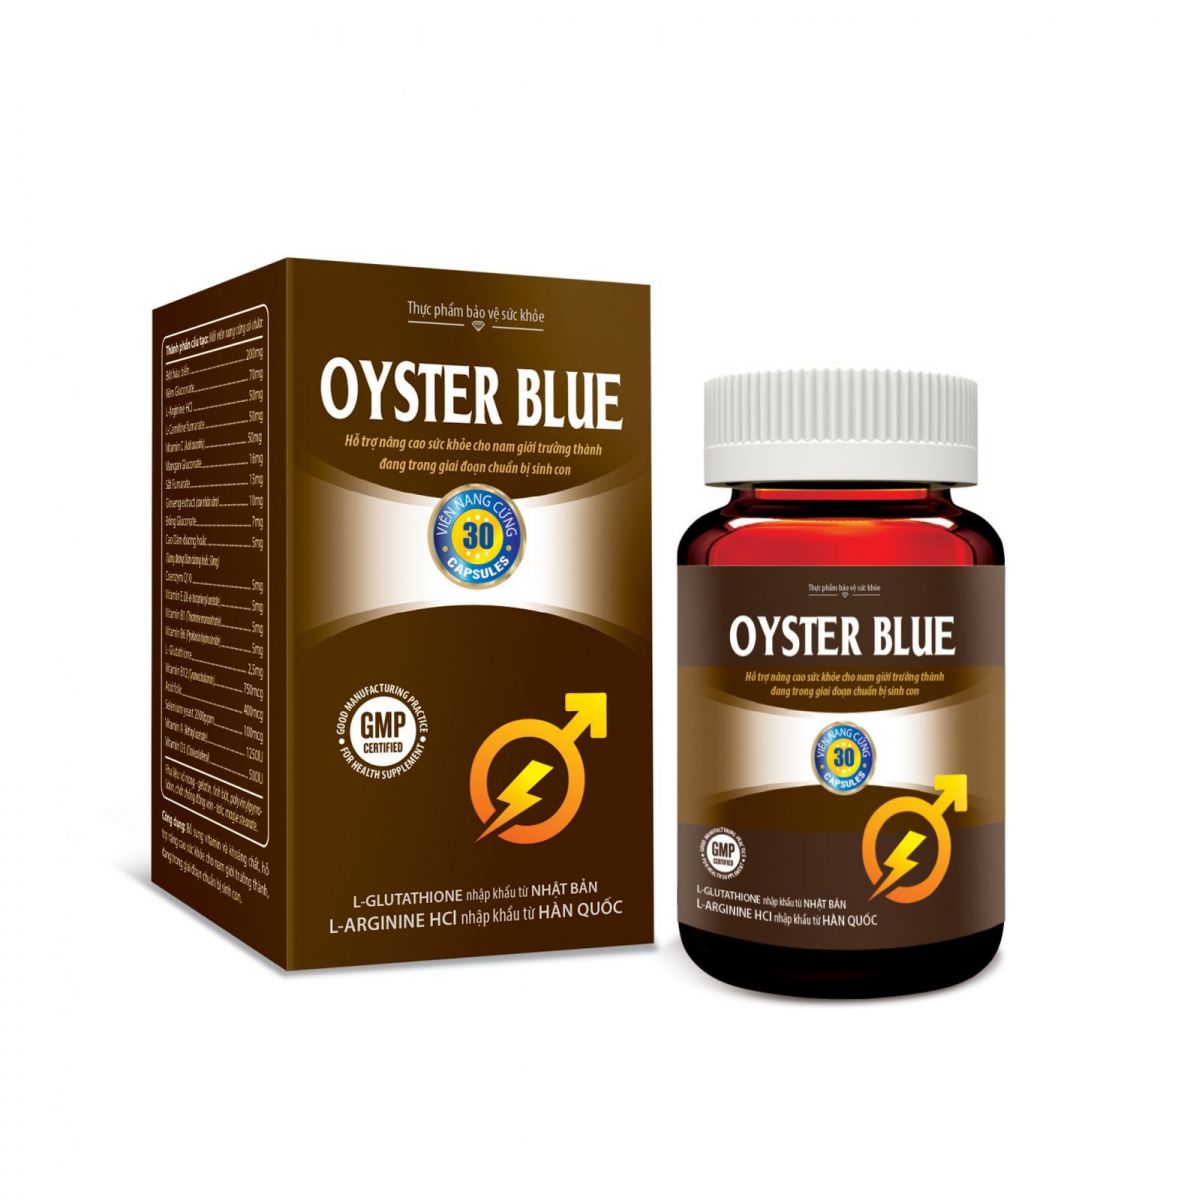 OYSTER BLUE